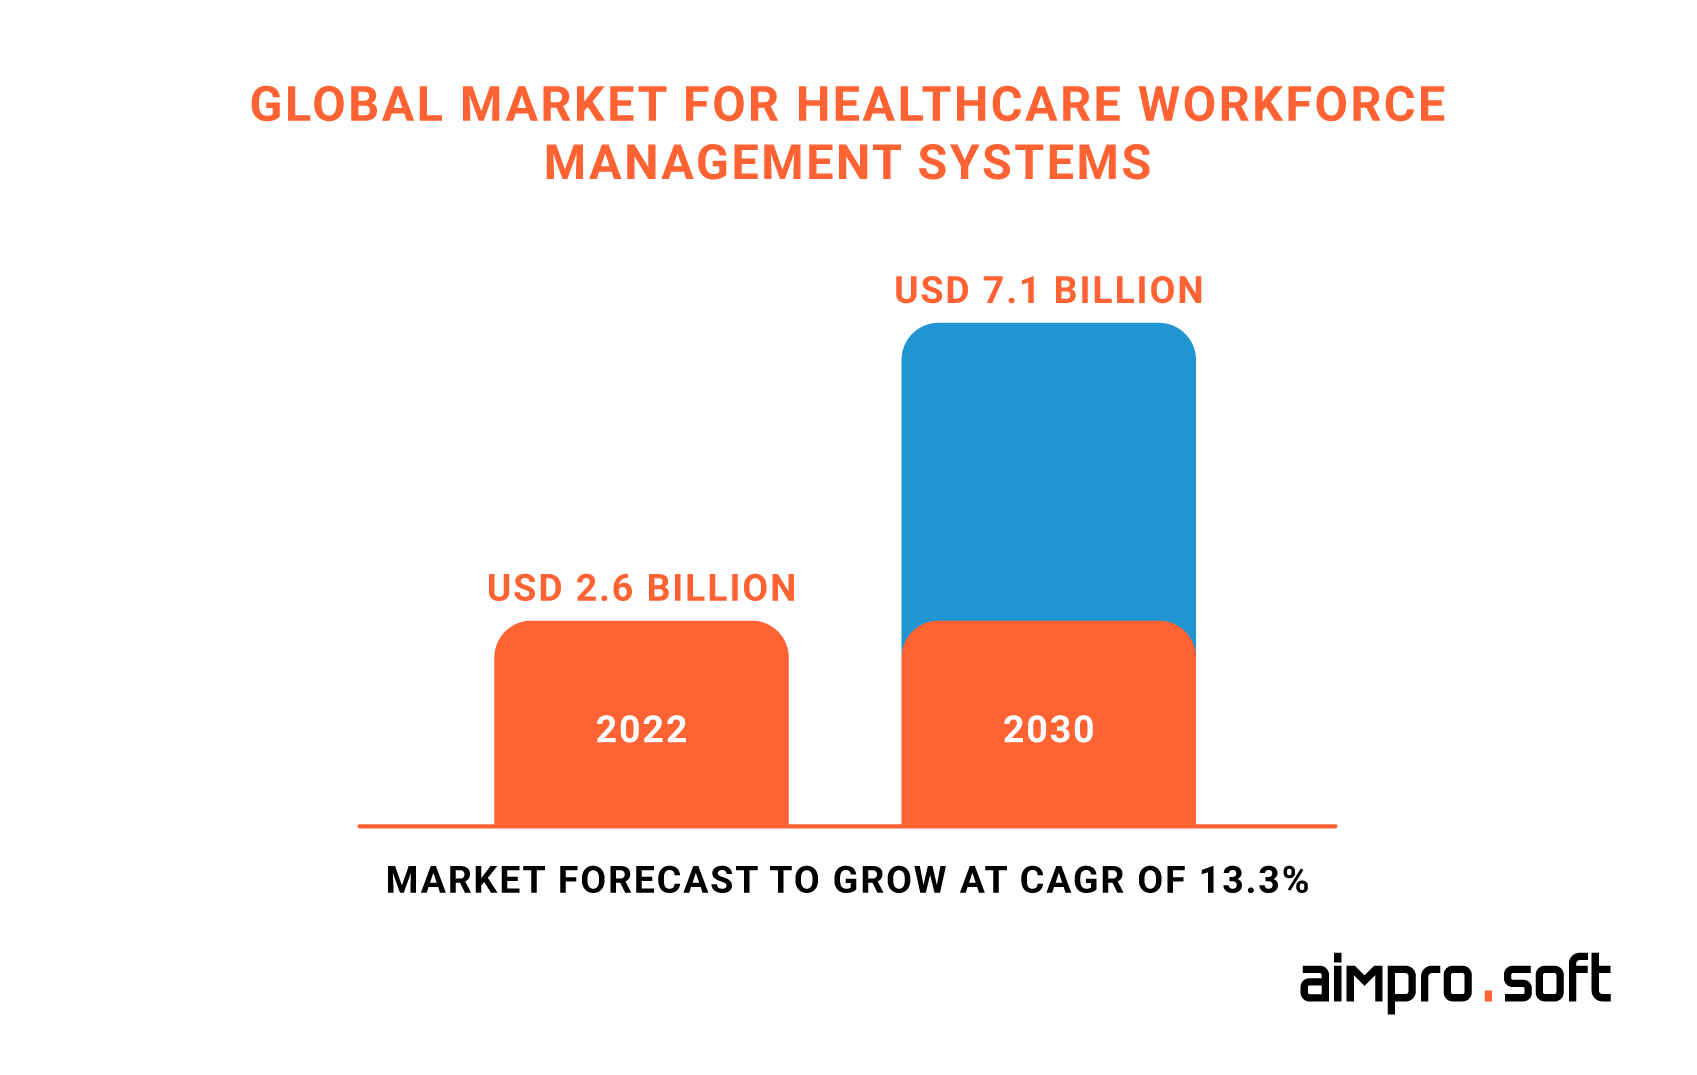 Global market for healthcare management systems